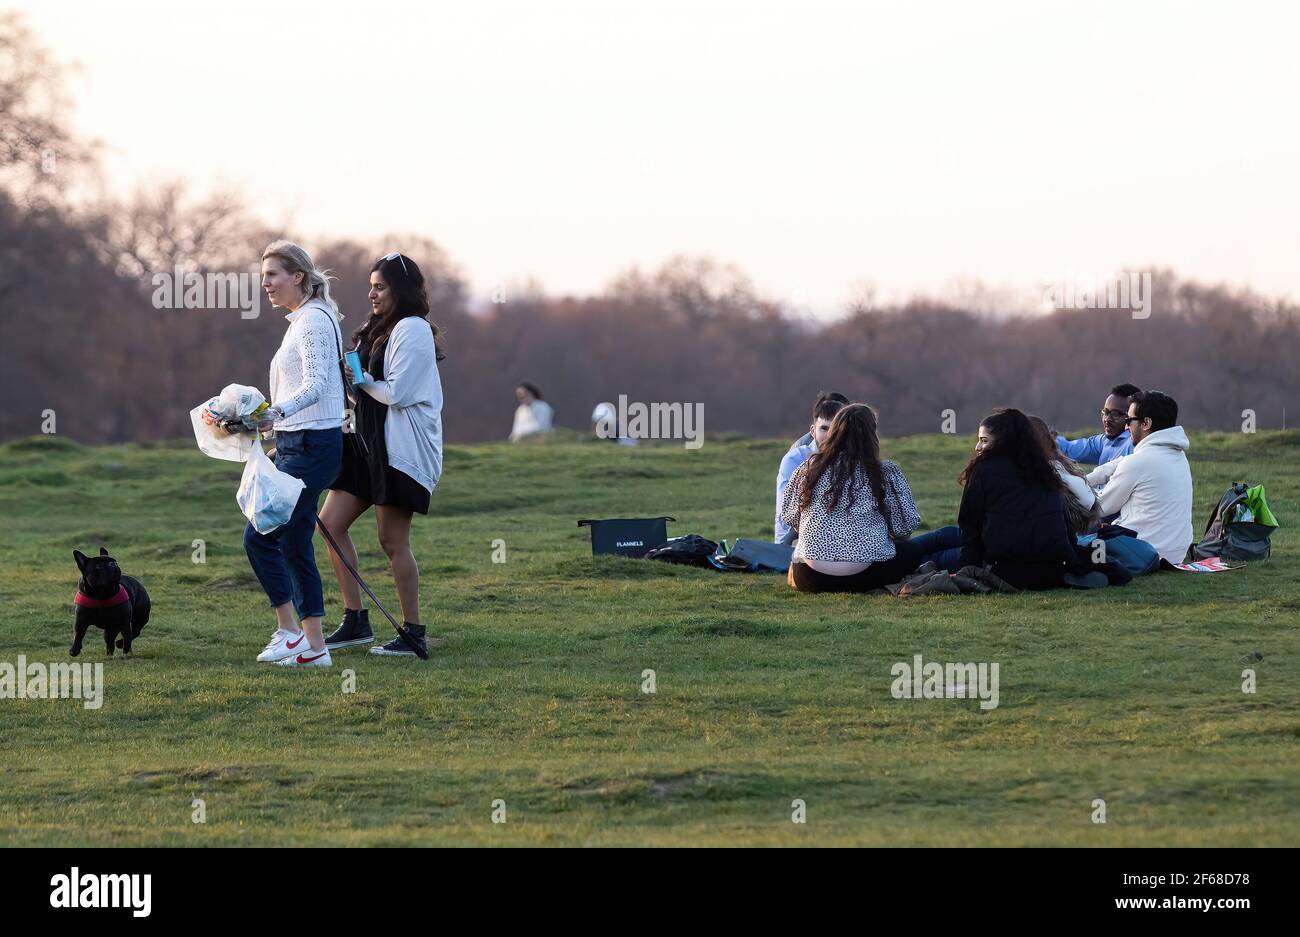 London, UK. 29th Mar, 2021. Members of the public relax and socialize in Richmond Park, London.The government further eased its restrictions as part of the ''roadmap'' out of the Covid-19 lockdown measures imposed in January. Groups of either six people or two households are now allowed to meet outside and organized outdoor sport can resume once more. Credit: Tejas Sandhu/SOPA Images/ZUMA Wire/Alamy Live News Stock Photo